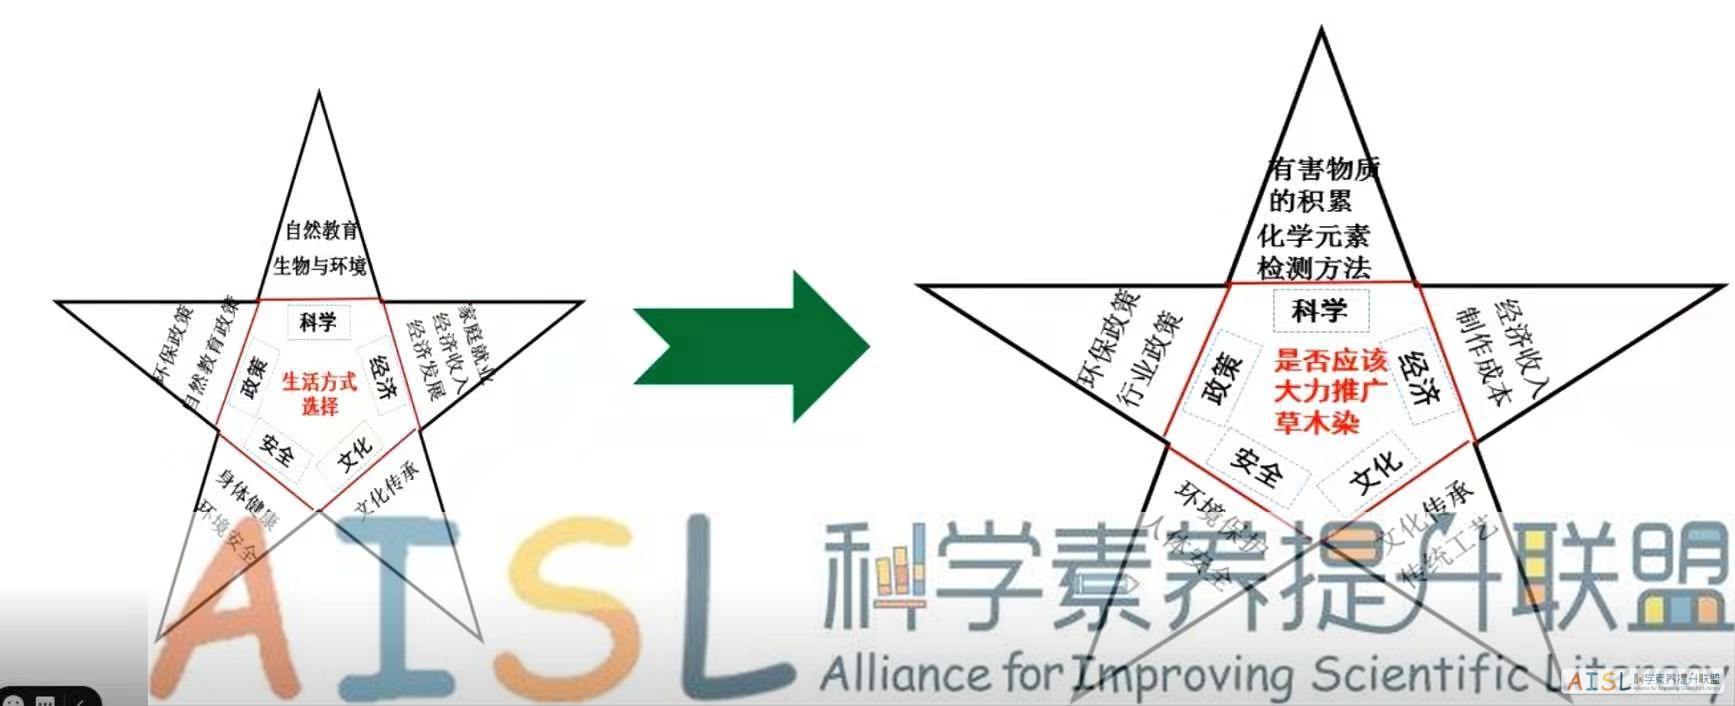 [SSI Learning] 全国初中学段研讨纪要（2020-12-30）<br>Minutes of the online meeting for SSI Learning project in middle schools (12/30/2020)插图